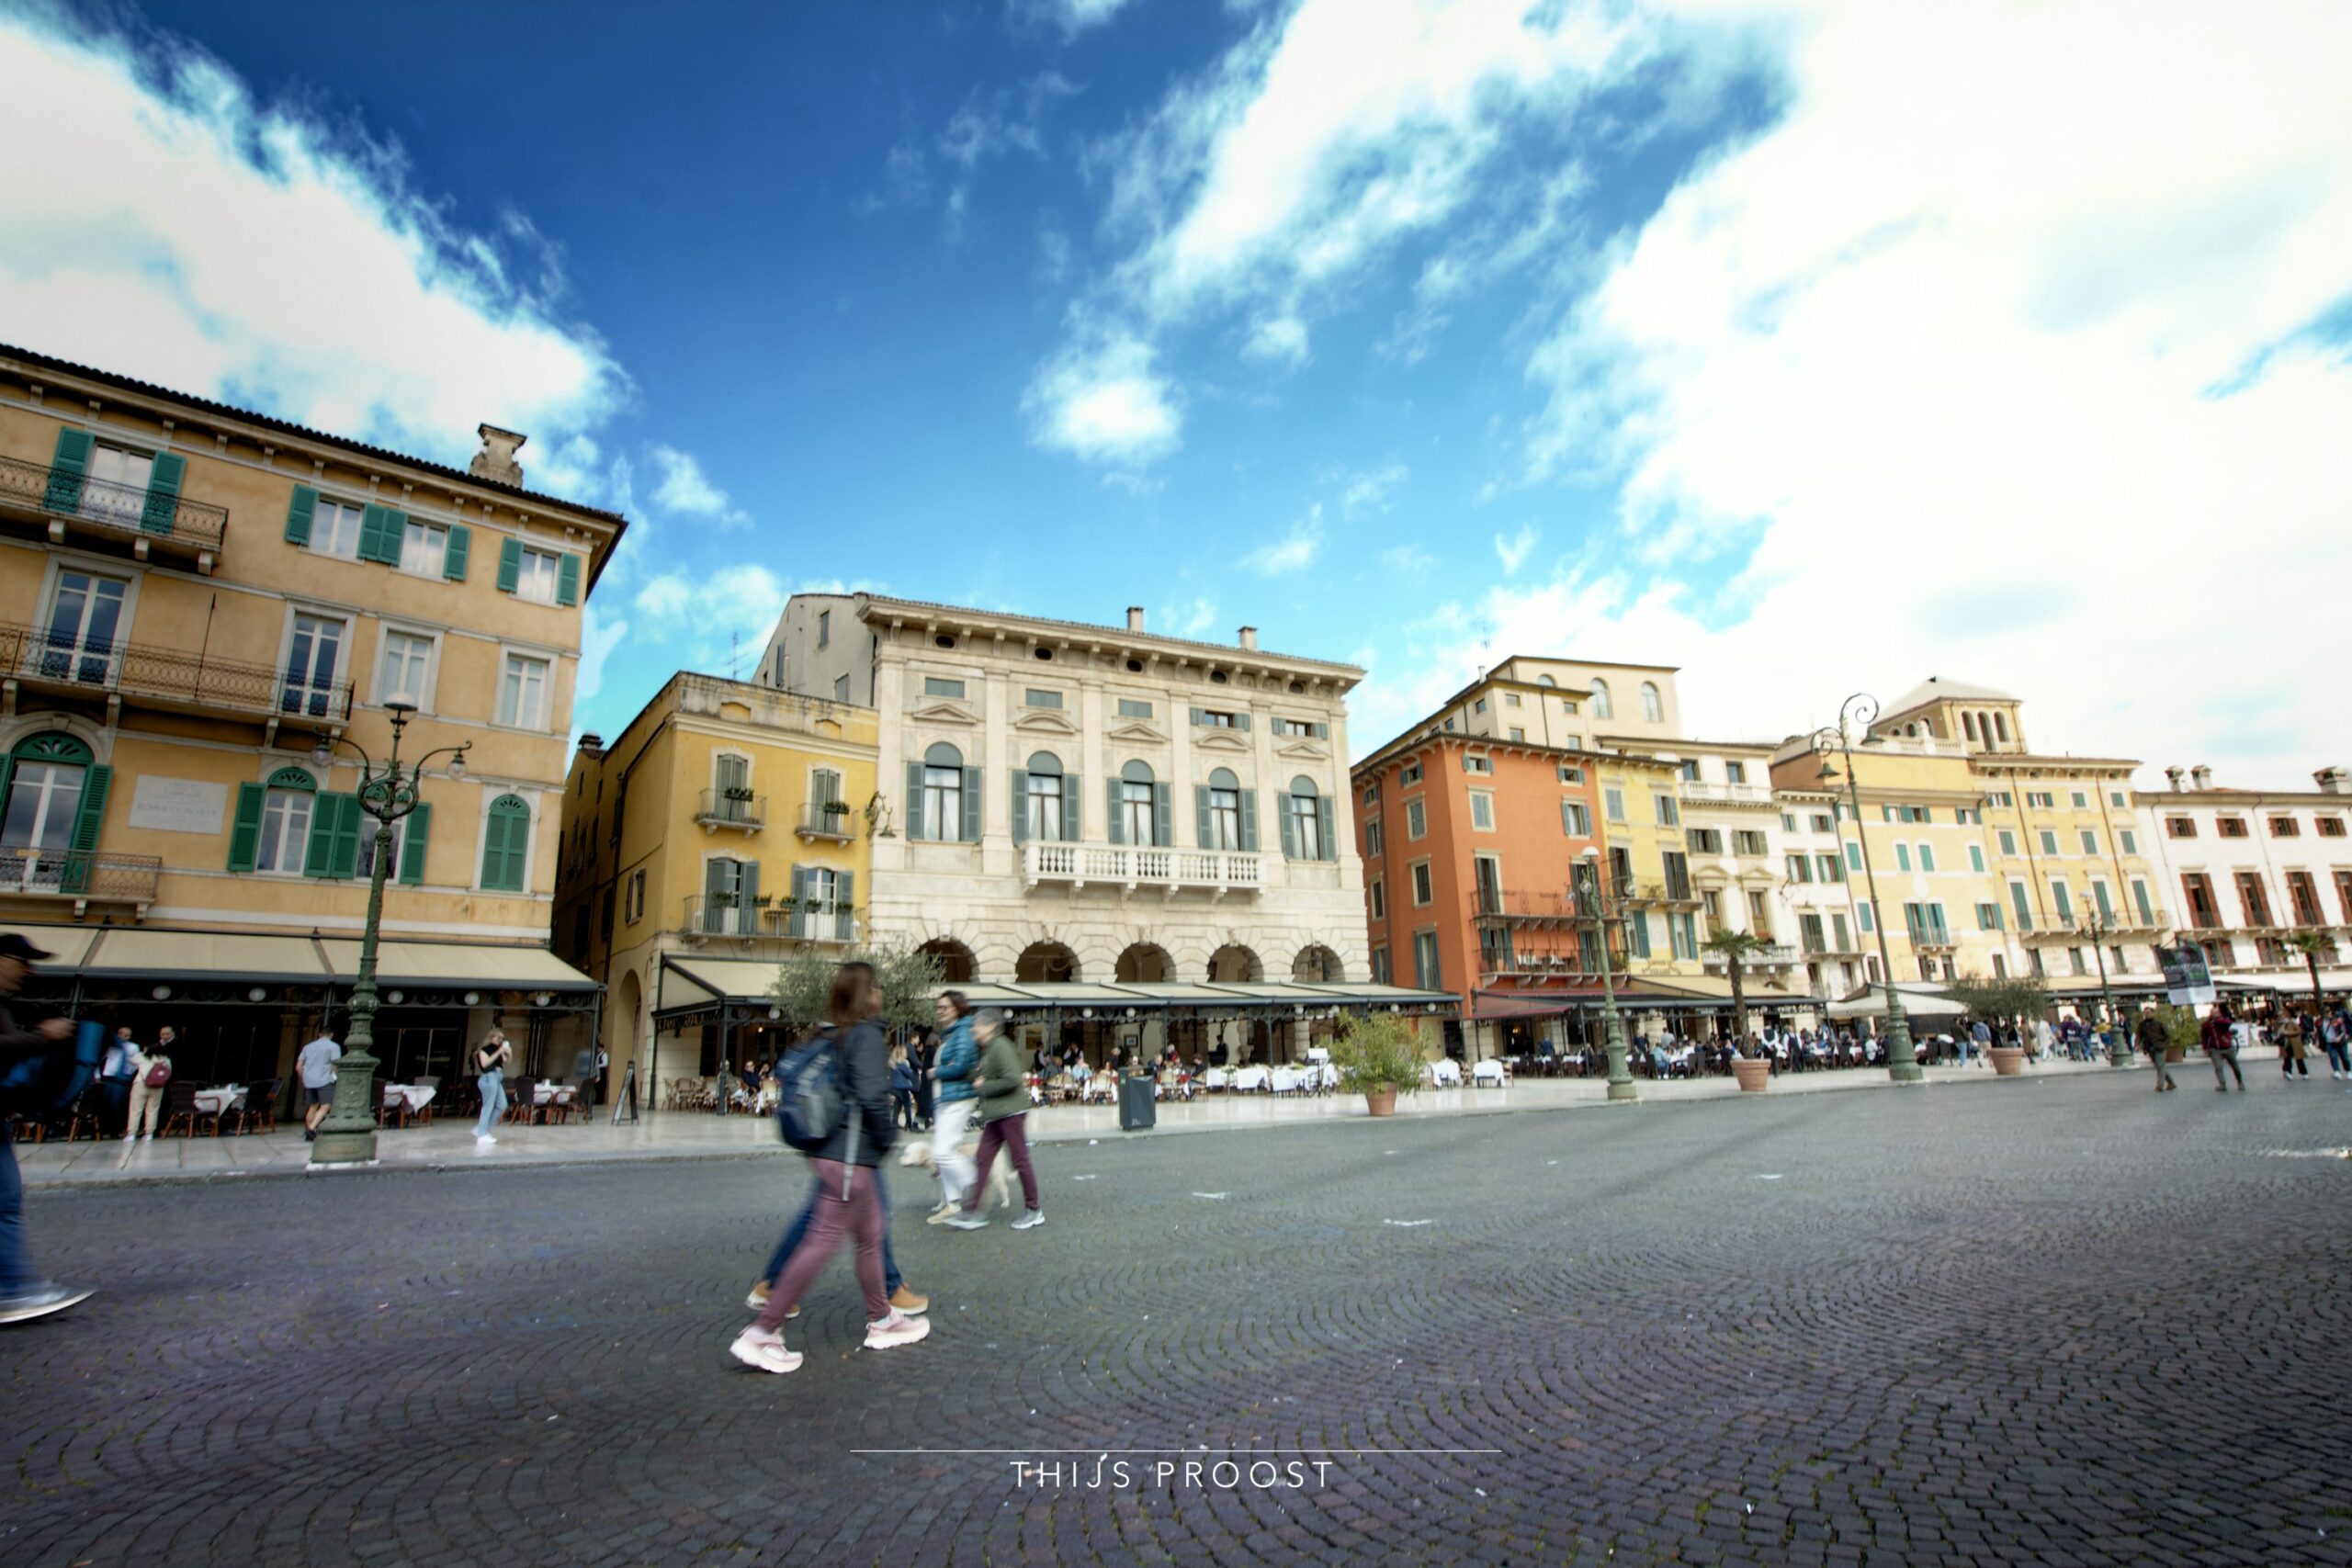 View of the market square of Verona Italy. In the background are buildings of classic Italian style. The from view shows people walking on their whey. They are a bit blurry because of motion blur. The sky is blue with medium clouds. it is a sunny day so the clouds are white.